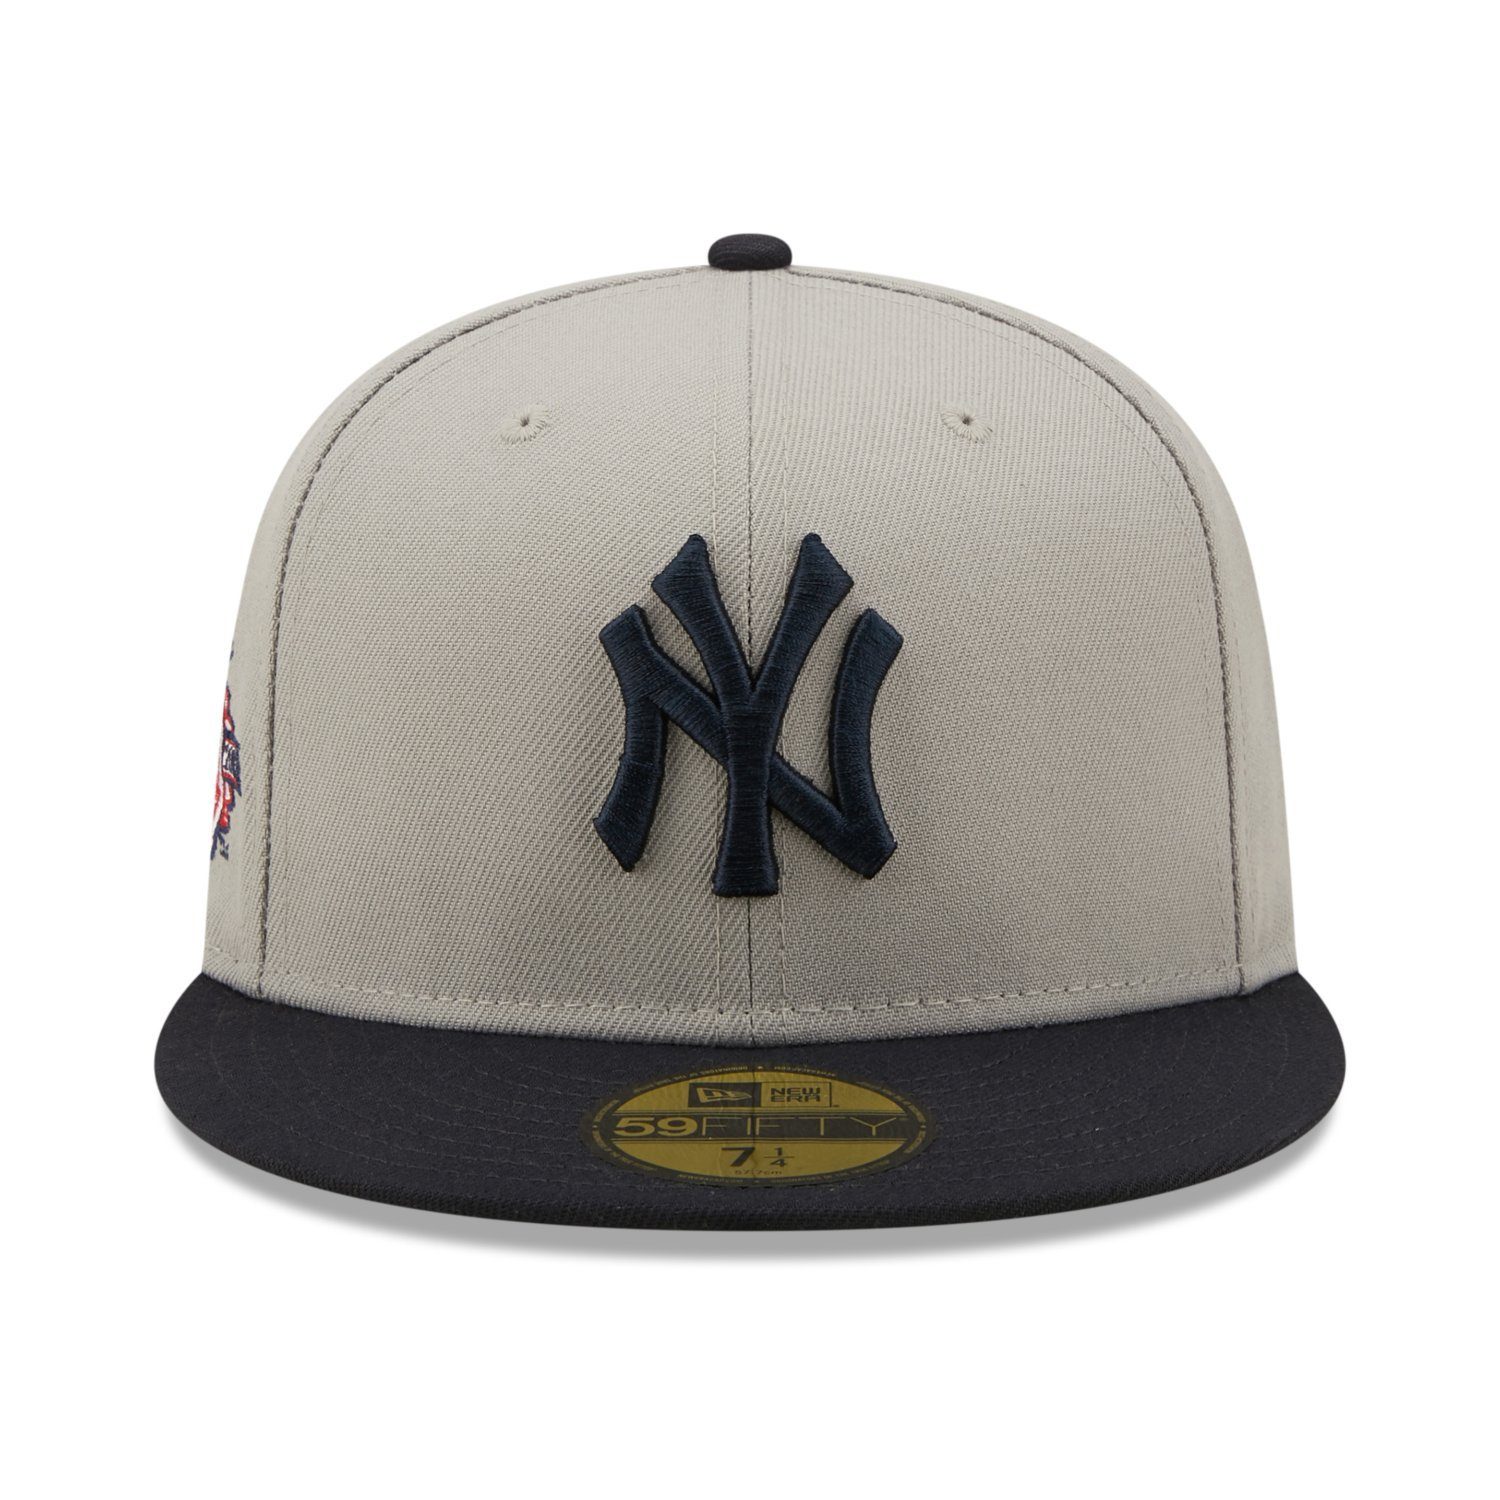 SIDE Cap Yankees Fitted Era New 59Fifty New PATCH York